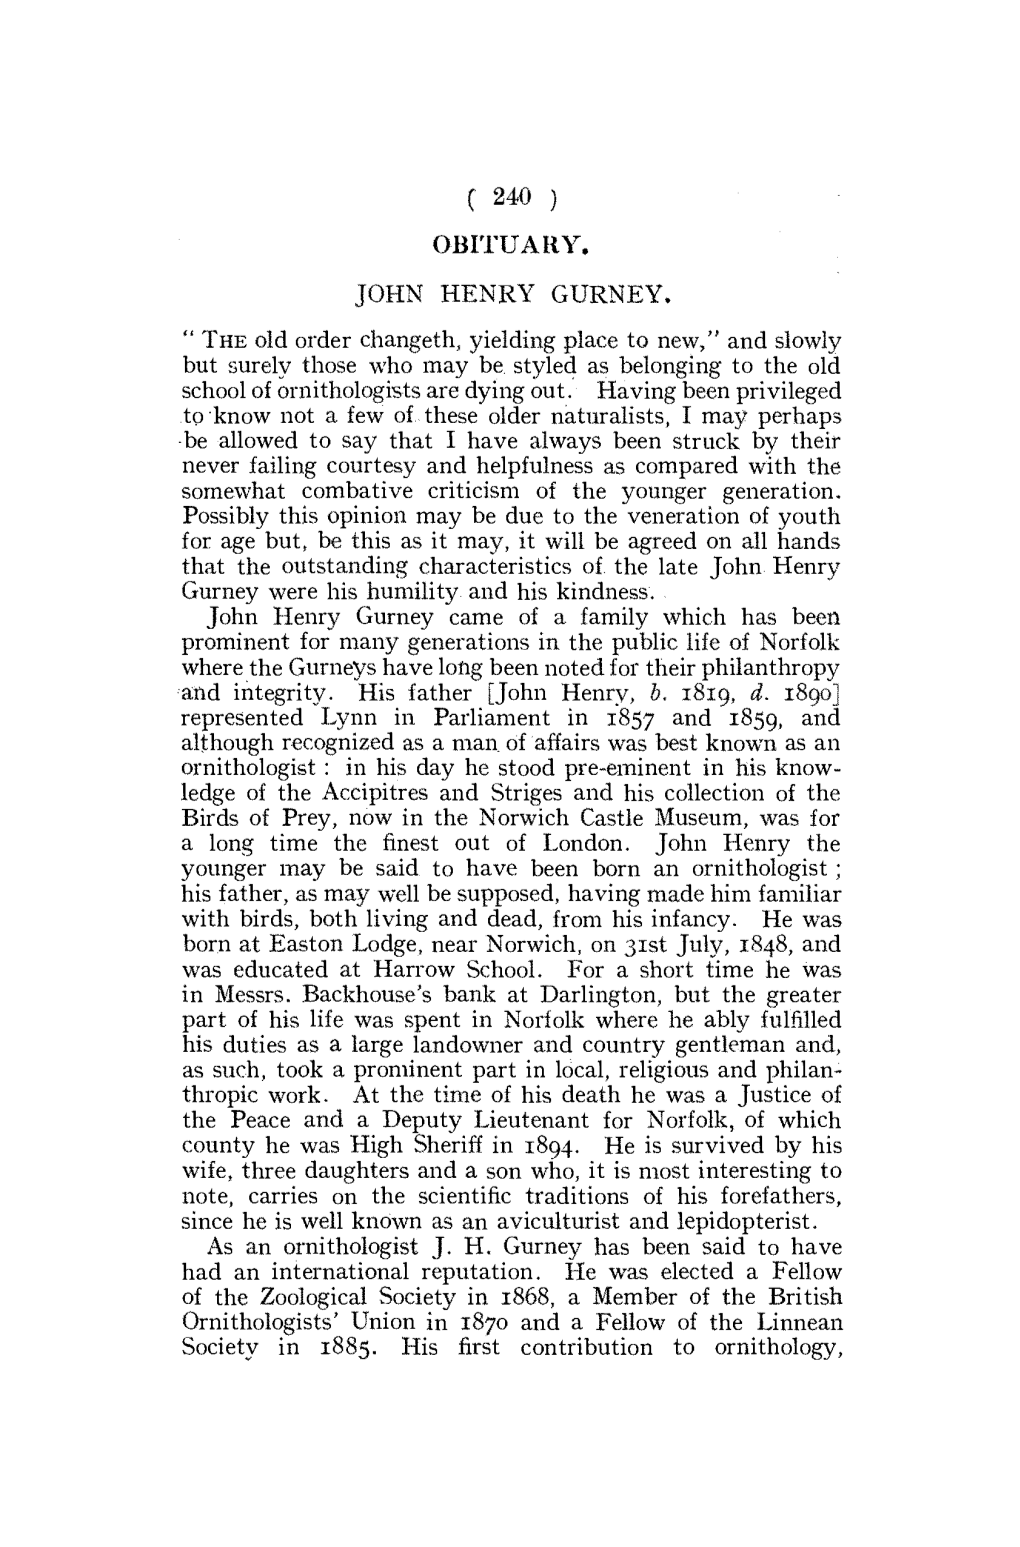 ( 240 ) OBITUARY. JOHN HENRY GURNEY. " the Old Order Changeth, Yielding Place to New," and Slowly but Surely Those Who May Be